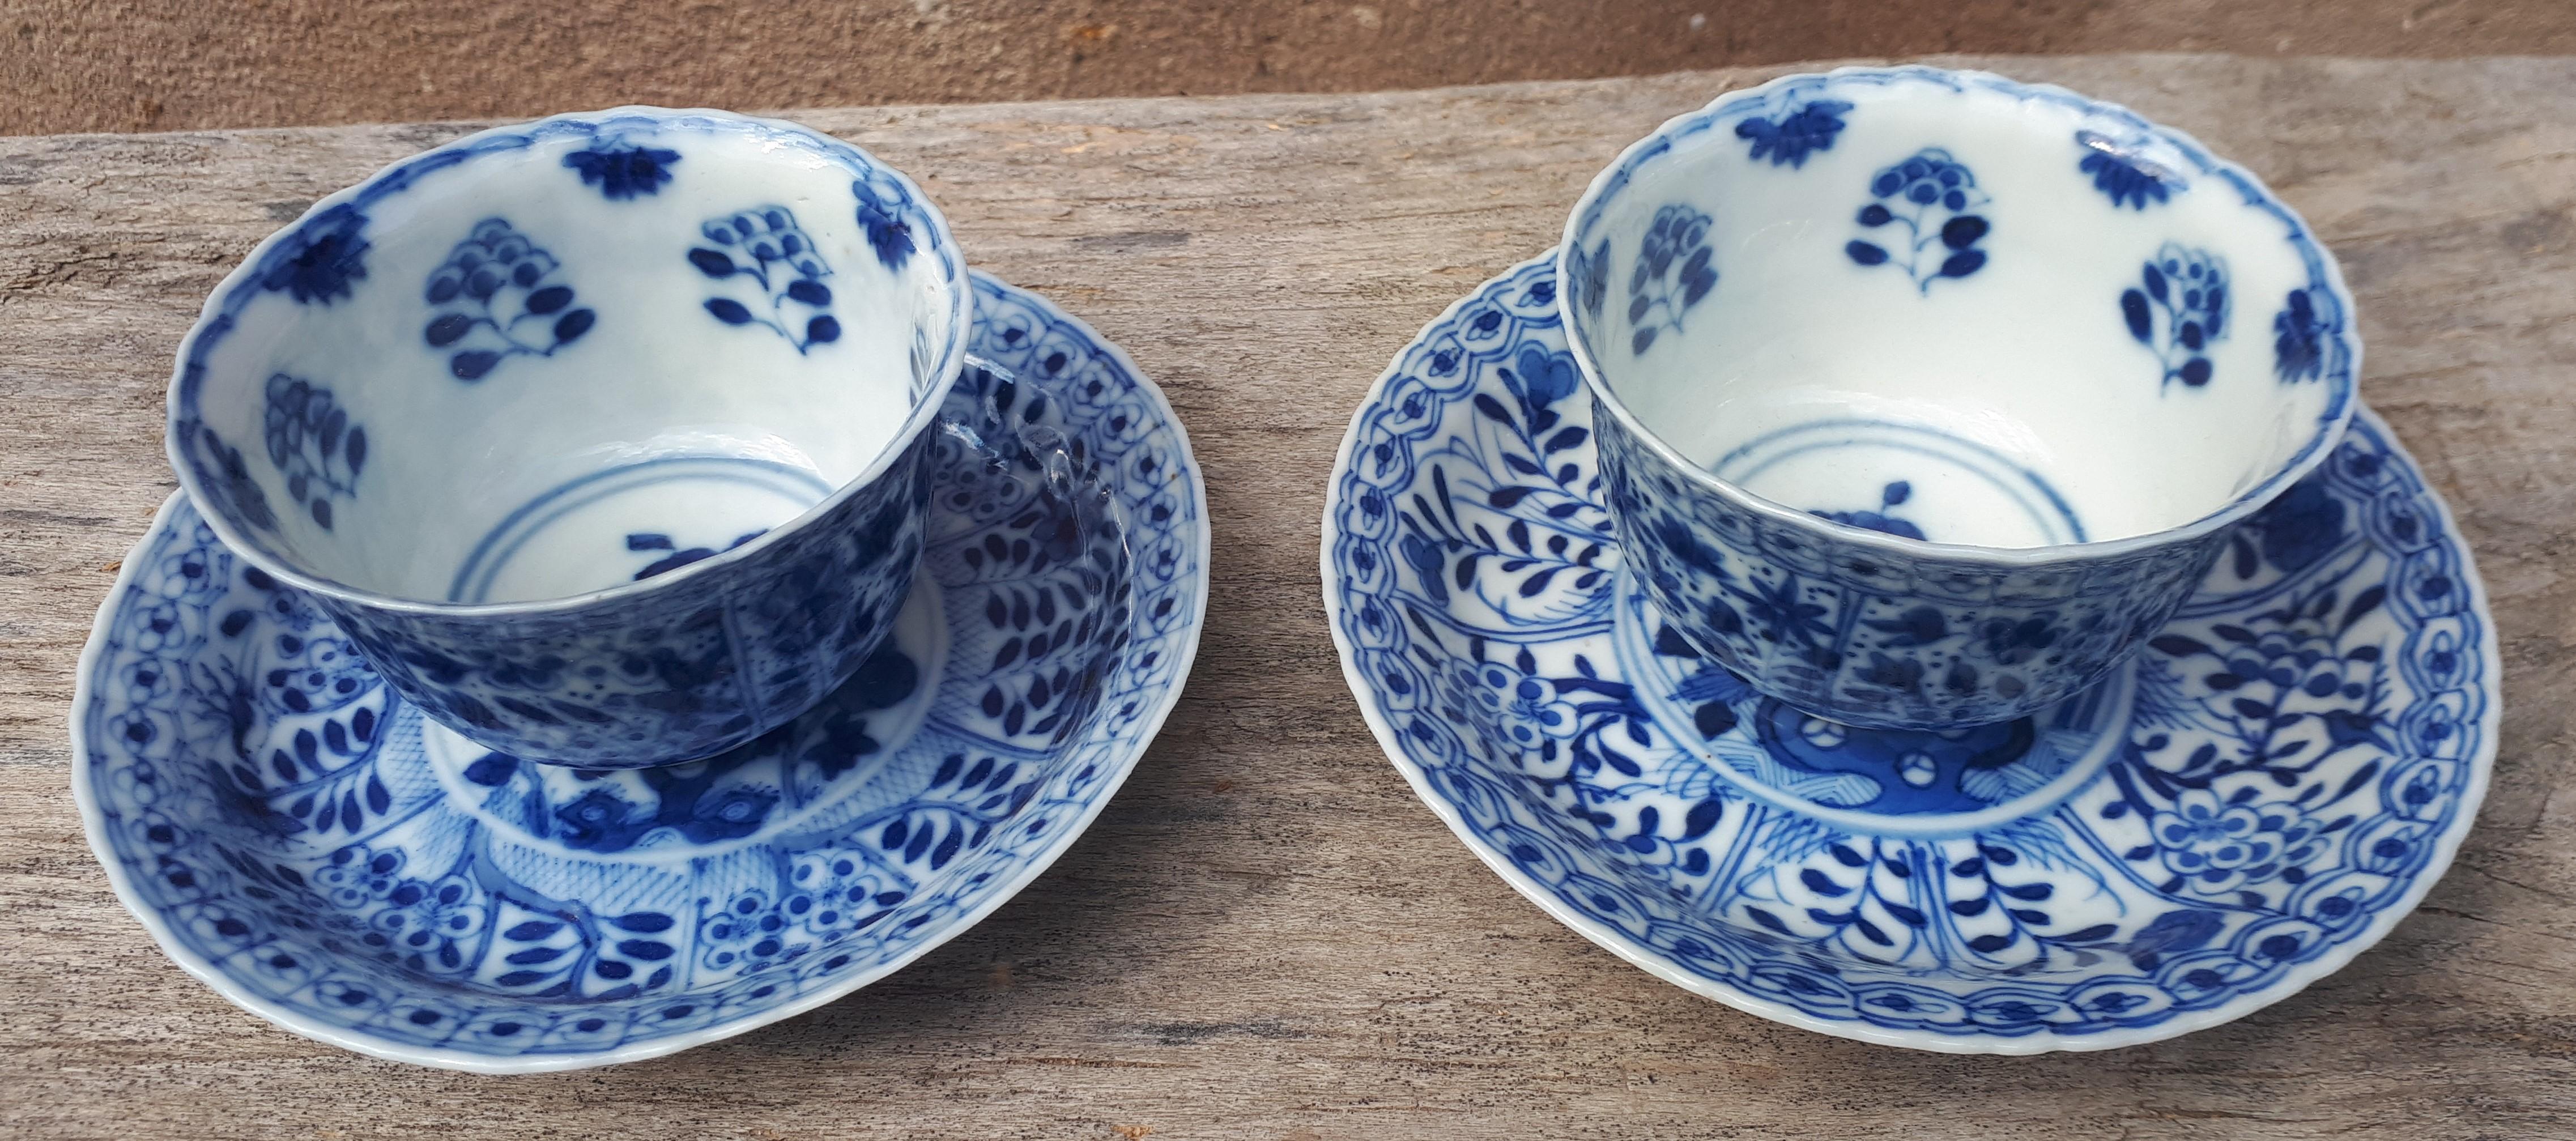 Pair of cups and saucers lobed in brackets, with slightly flared rim, floral decoration in underglaze blue. In a perfect state !
China, Kangxi period.

NB : the dimensions given are those of the cups